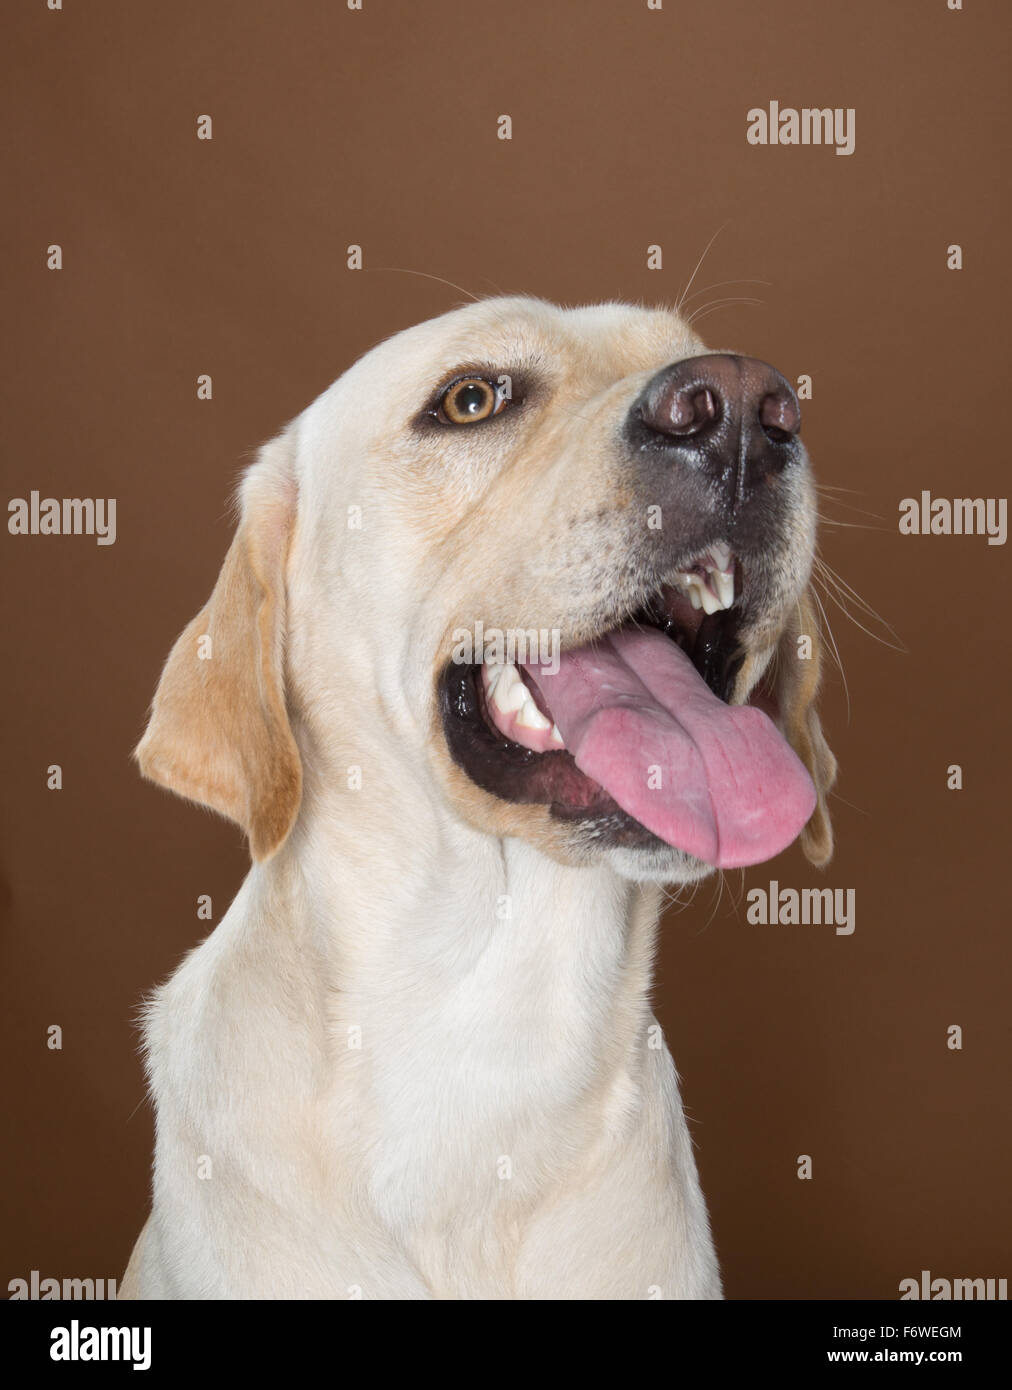 Labrador posing in a studio against a cream and brown wall, mans best friend. Stock Photo